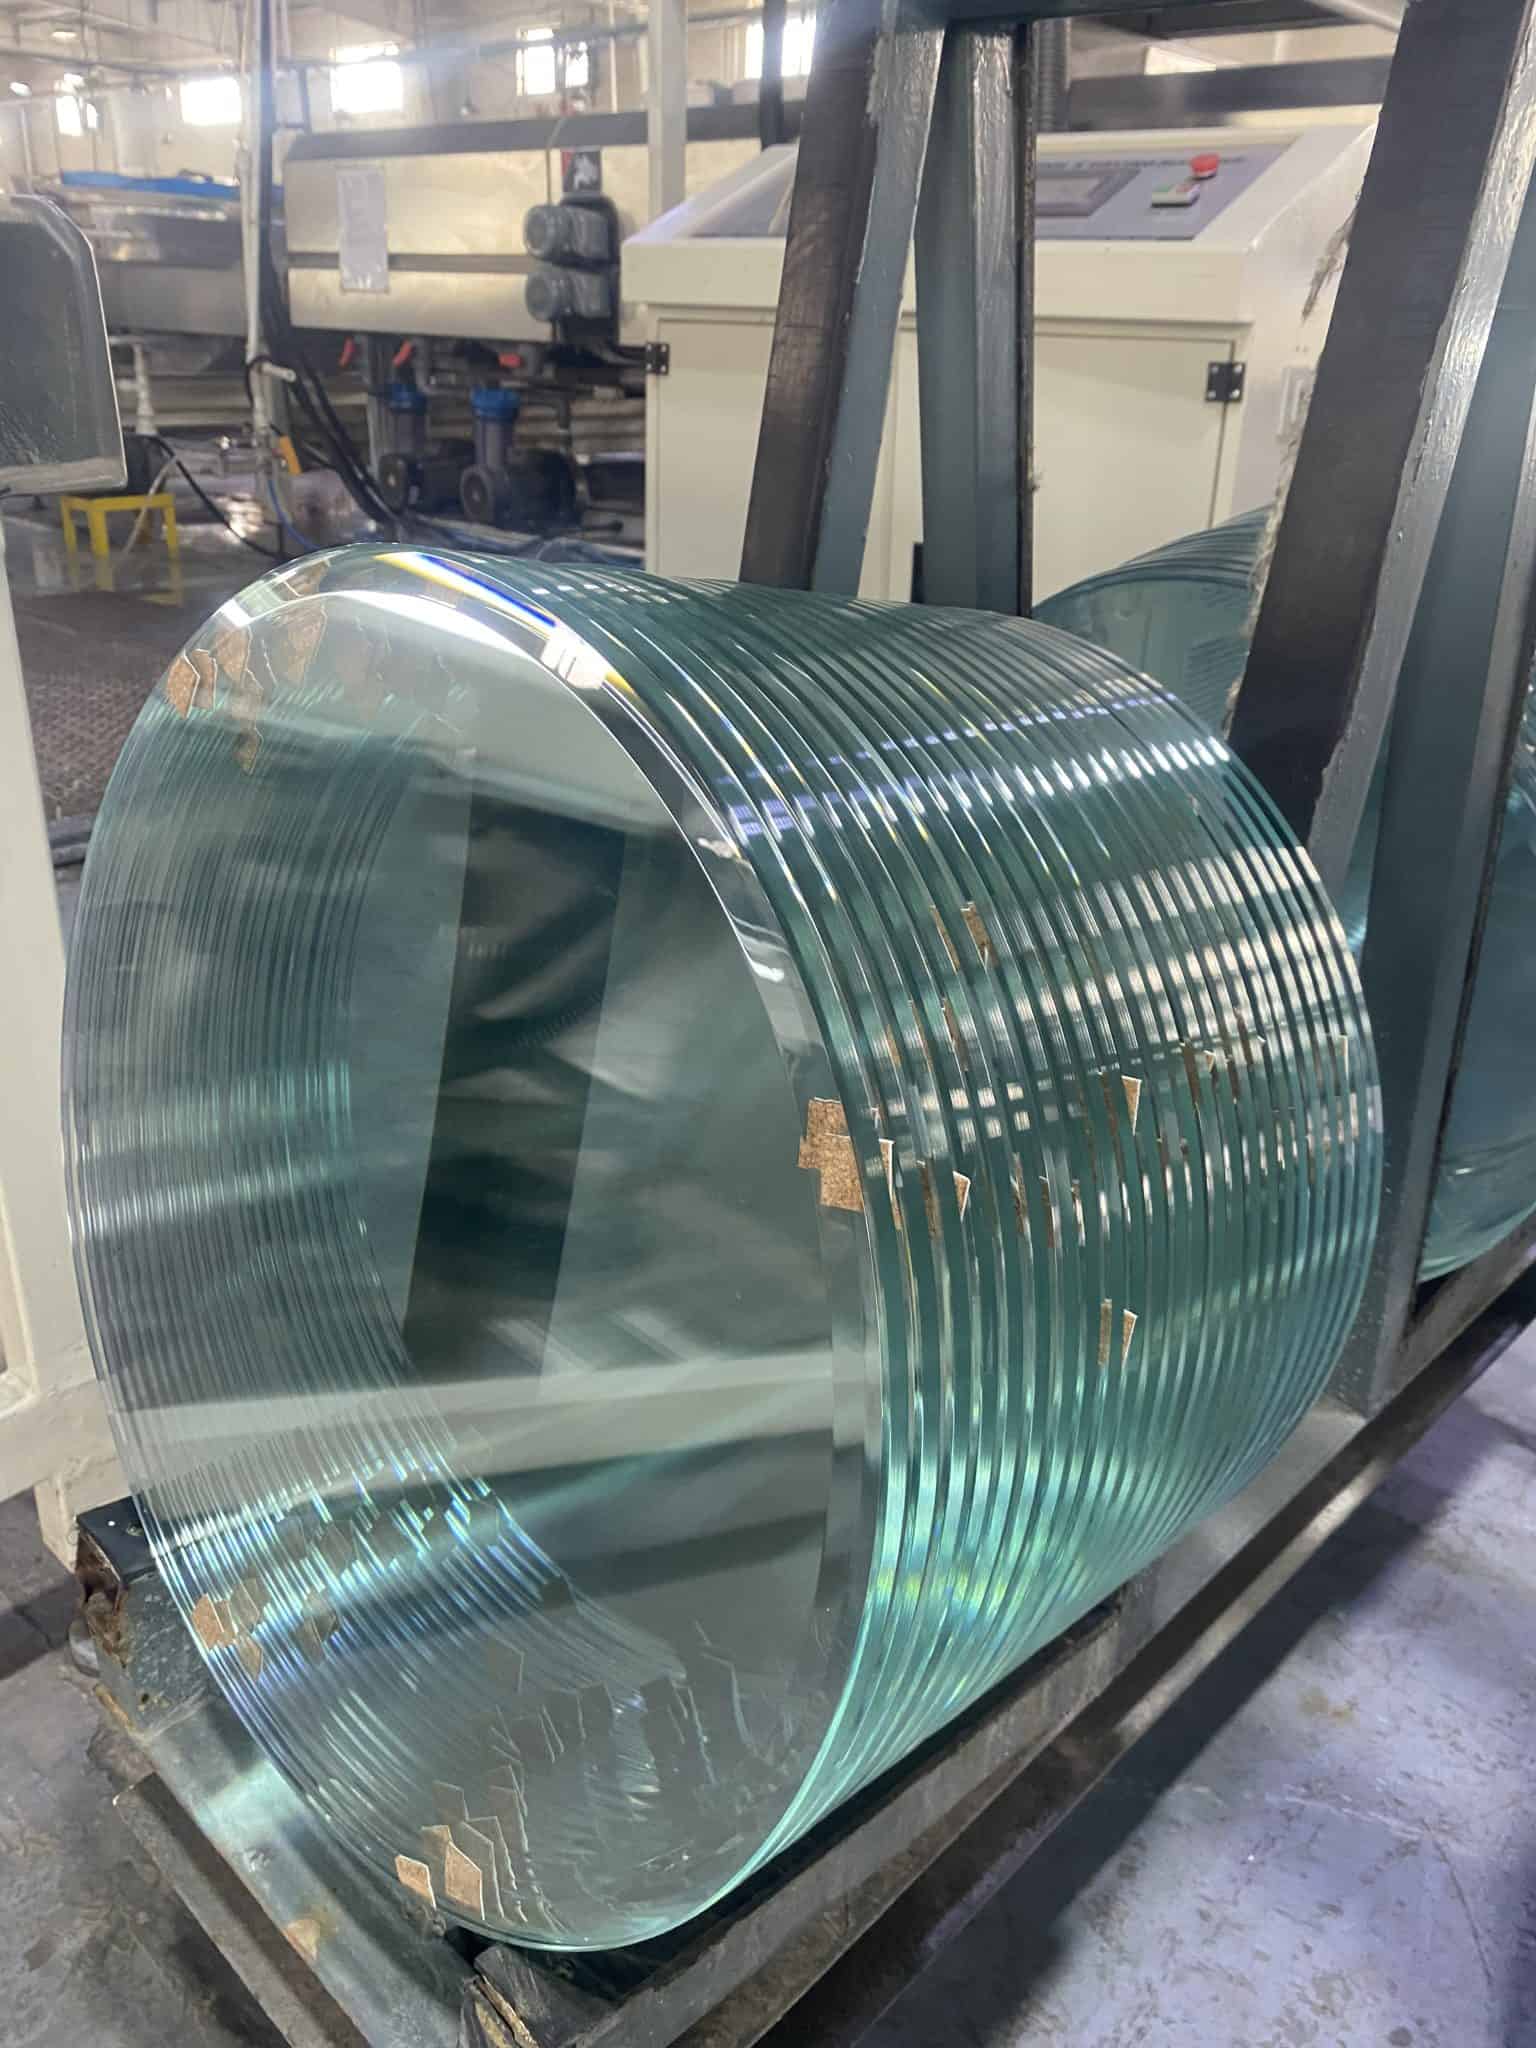 beveled glass table top in factory.jpg